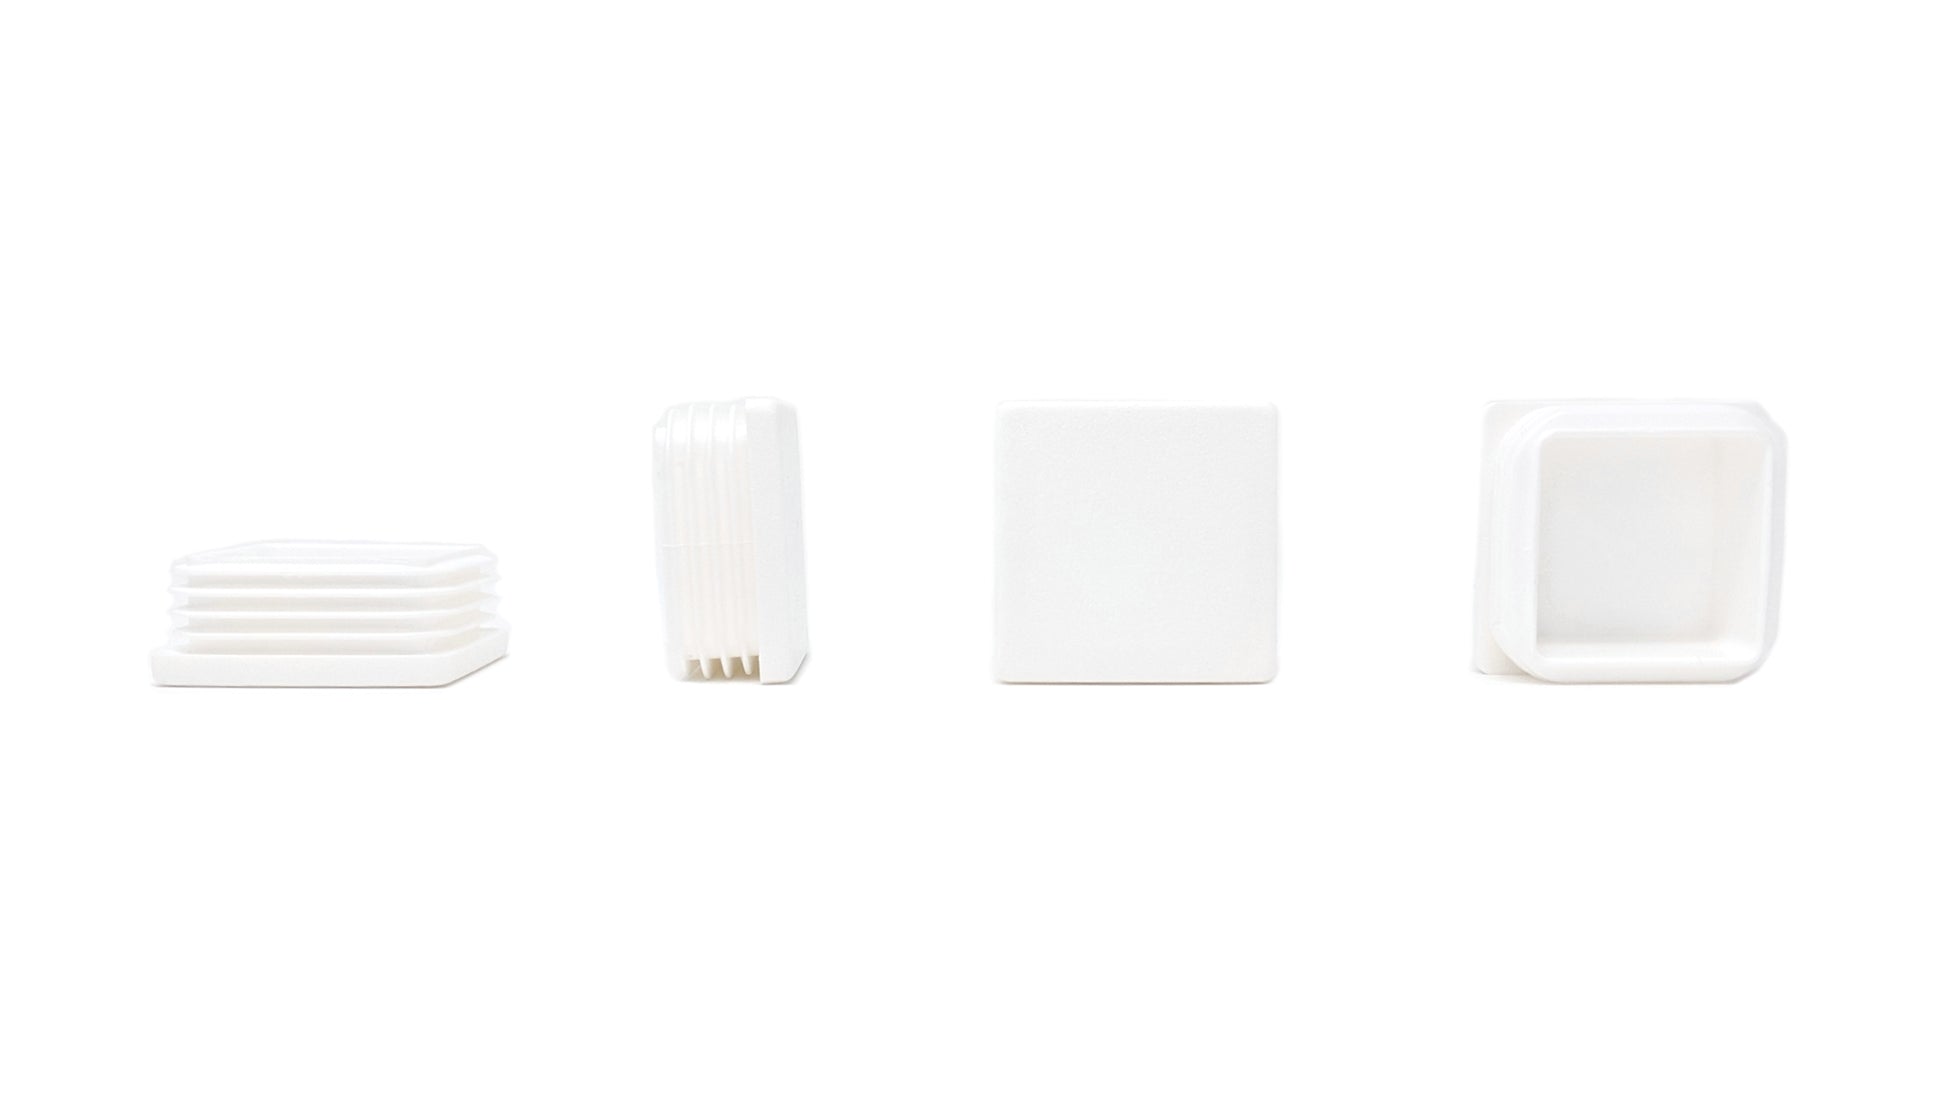 Square Tube Inserts 45mm x 45mm White | Made in Germany | Keay Vital Parts - Keay Vital Parts